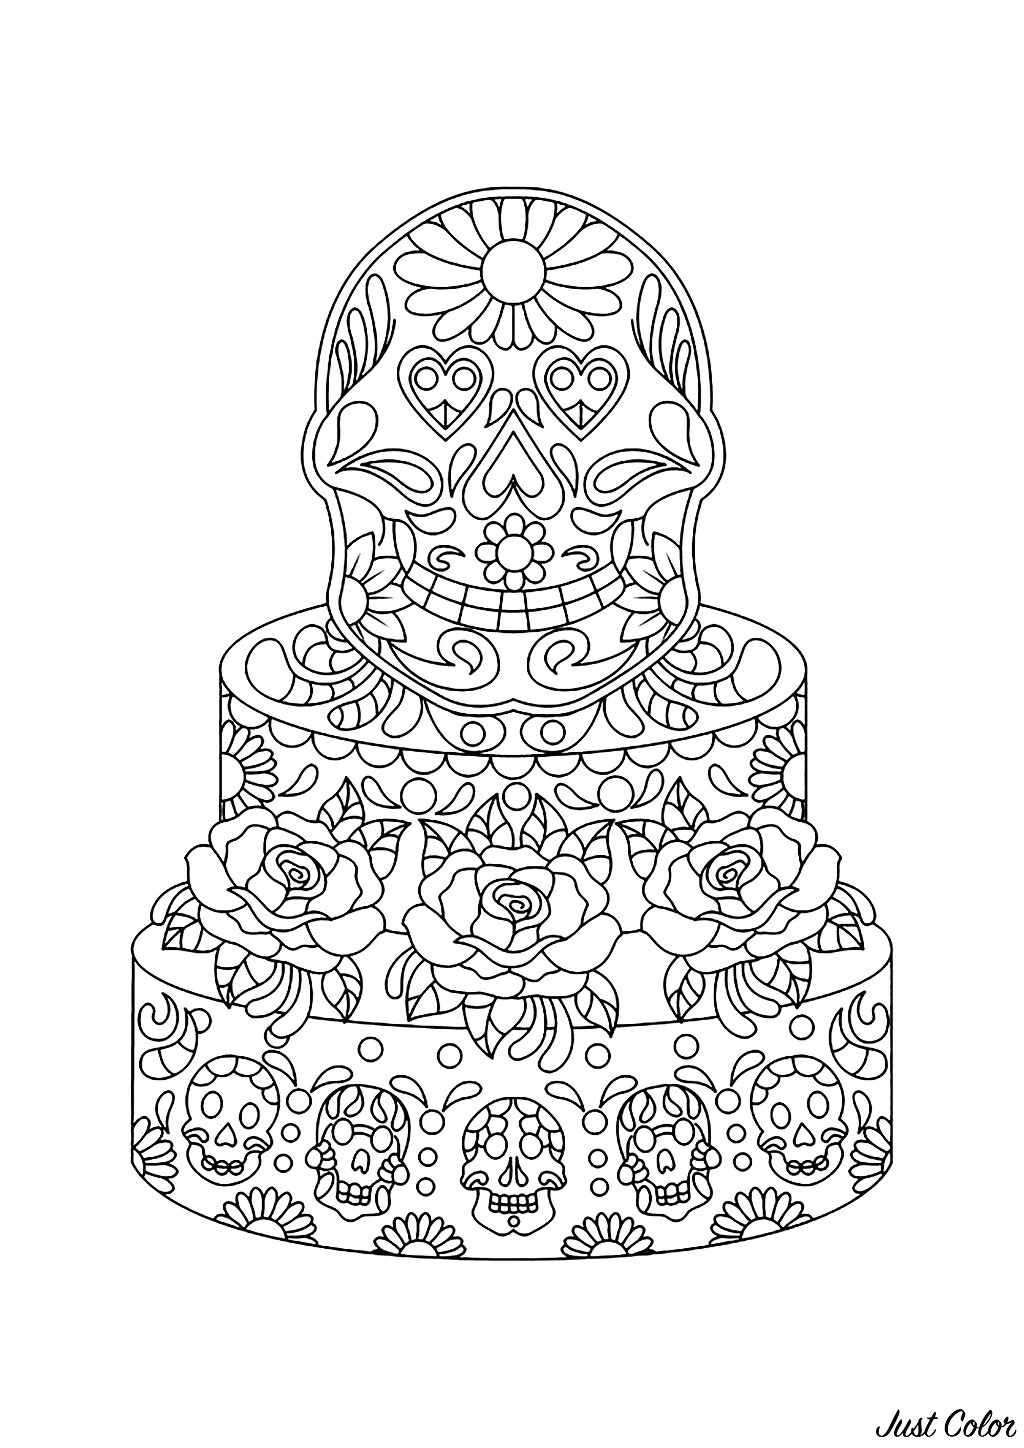 With its large Mexican masks, this coloring page will make you travel to Dia de los Muertos!. Delicate details and a harmonious style contribute to the beauty of this coloring drawing. You'll love coloring it in and feel like you're in Mexico on the Day of the Dead! So, ready to get started?